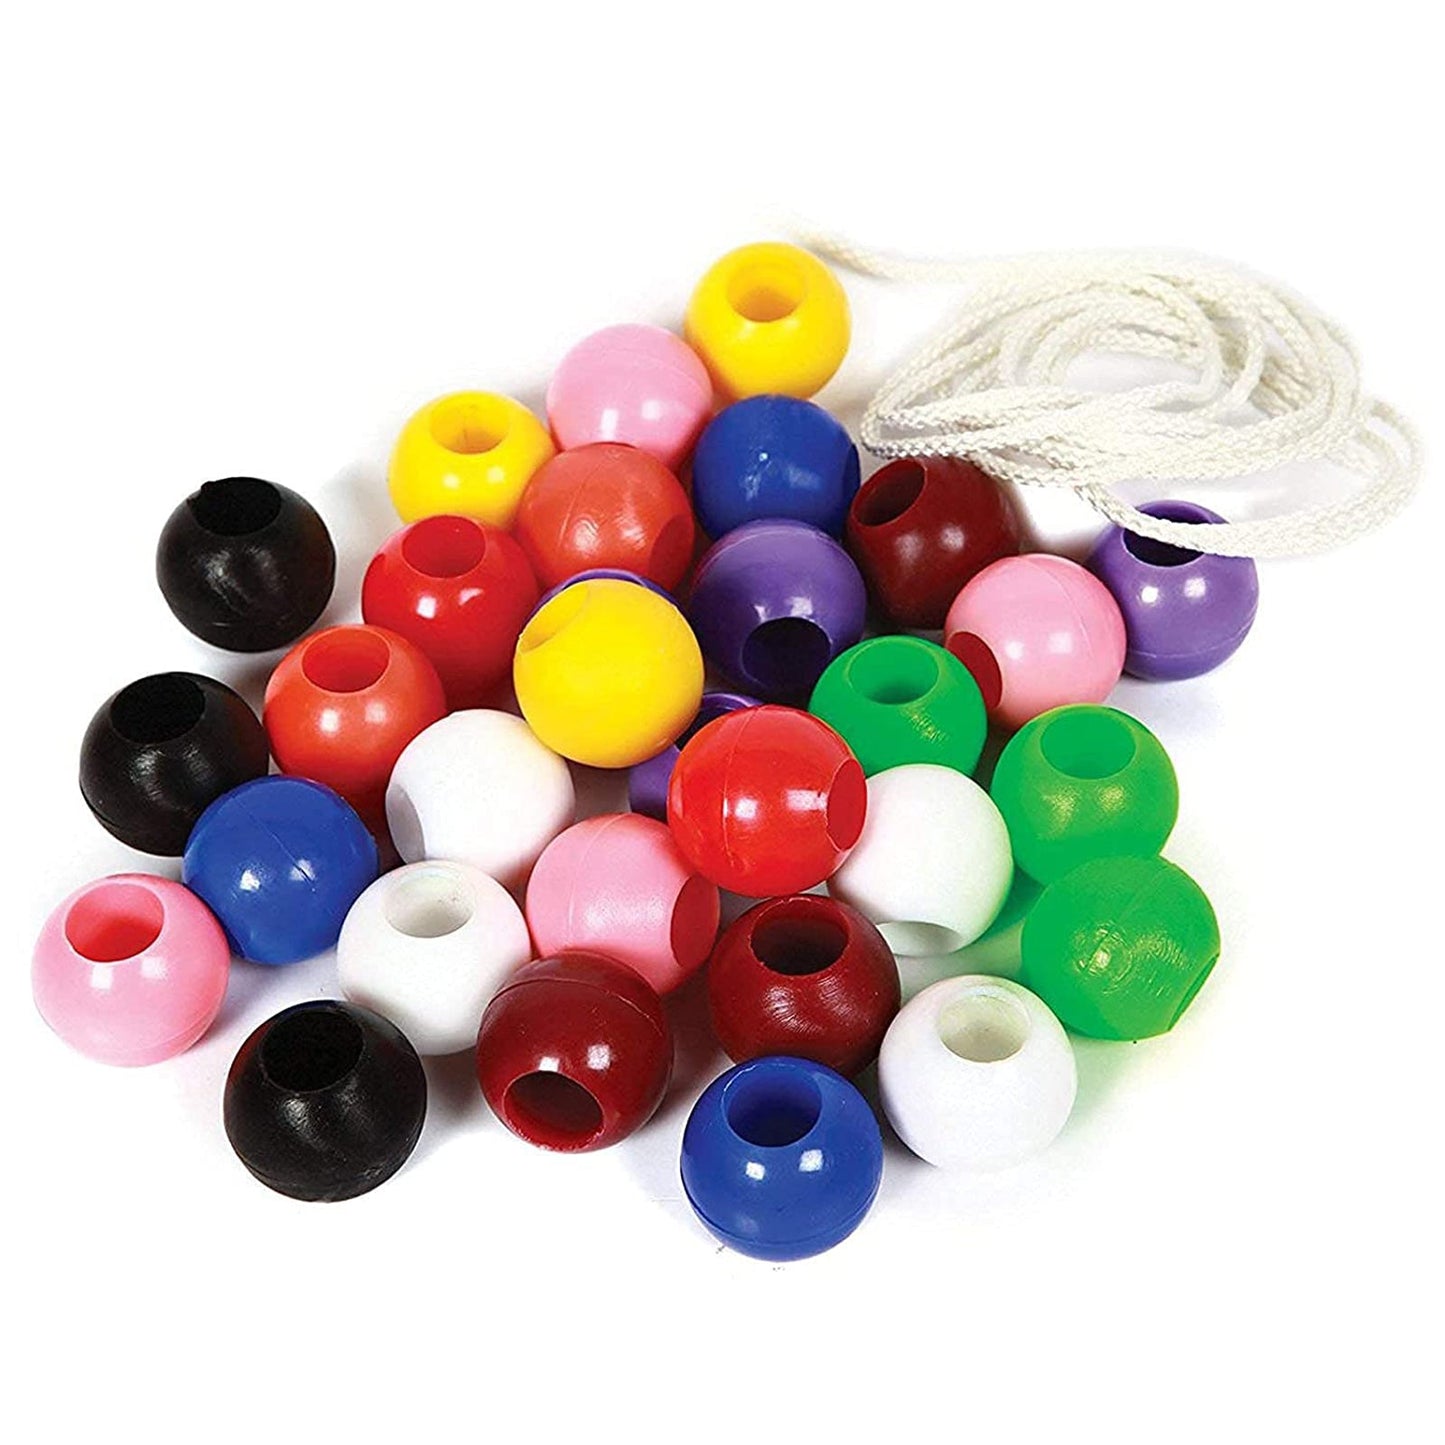 Plastic Beads Multi Color Set with Thread, Pack of 50 Beads 20 mm